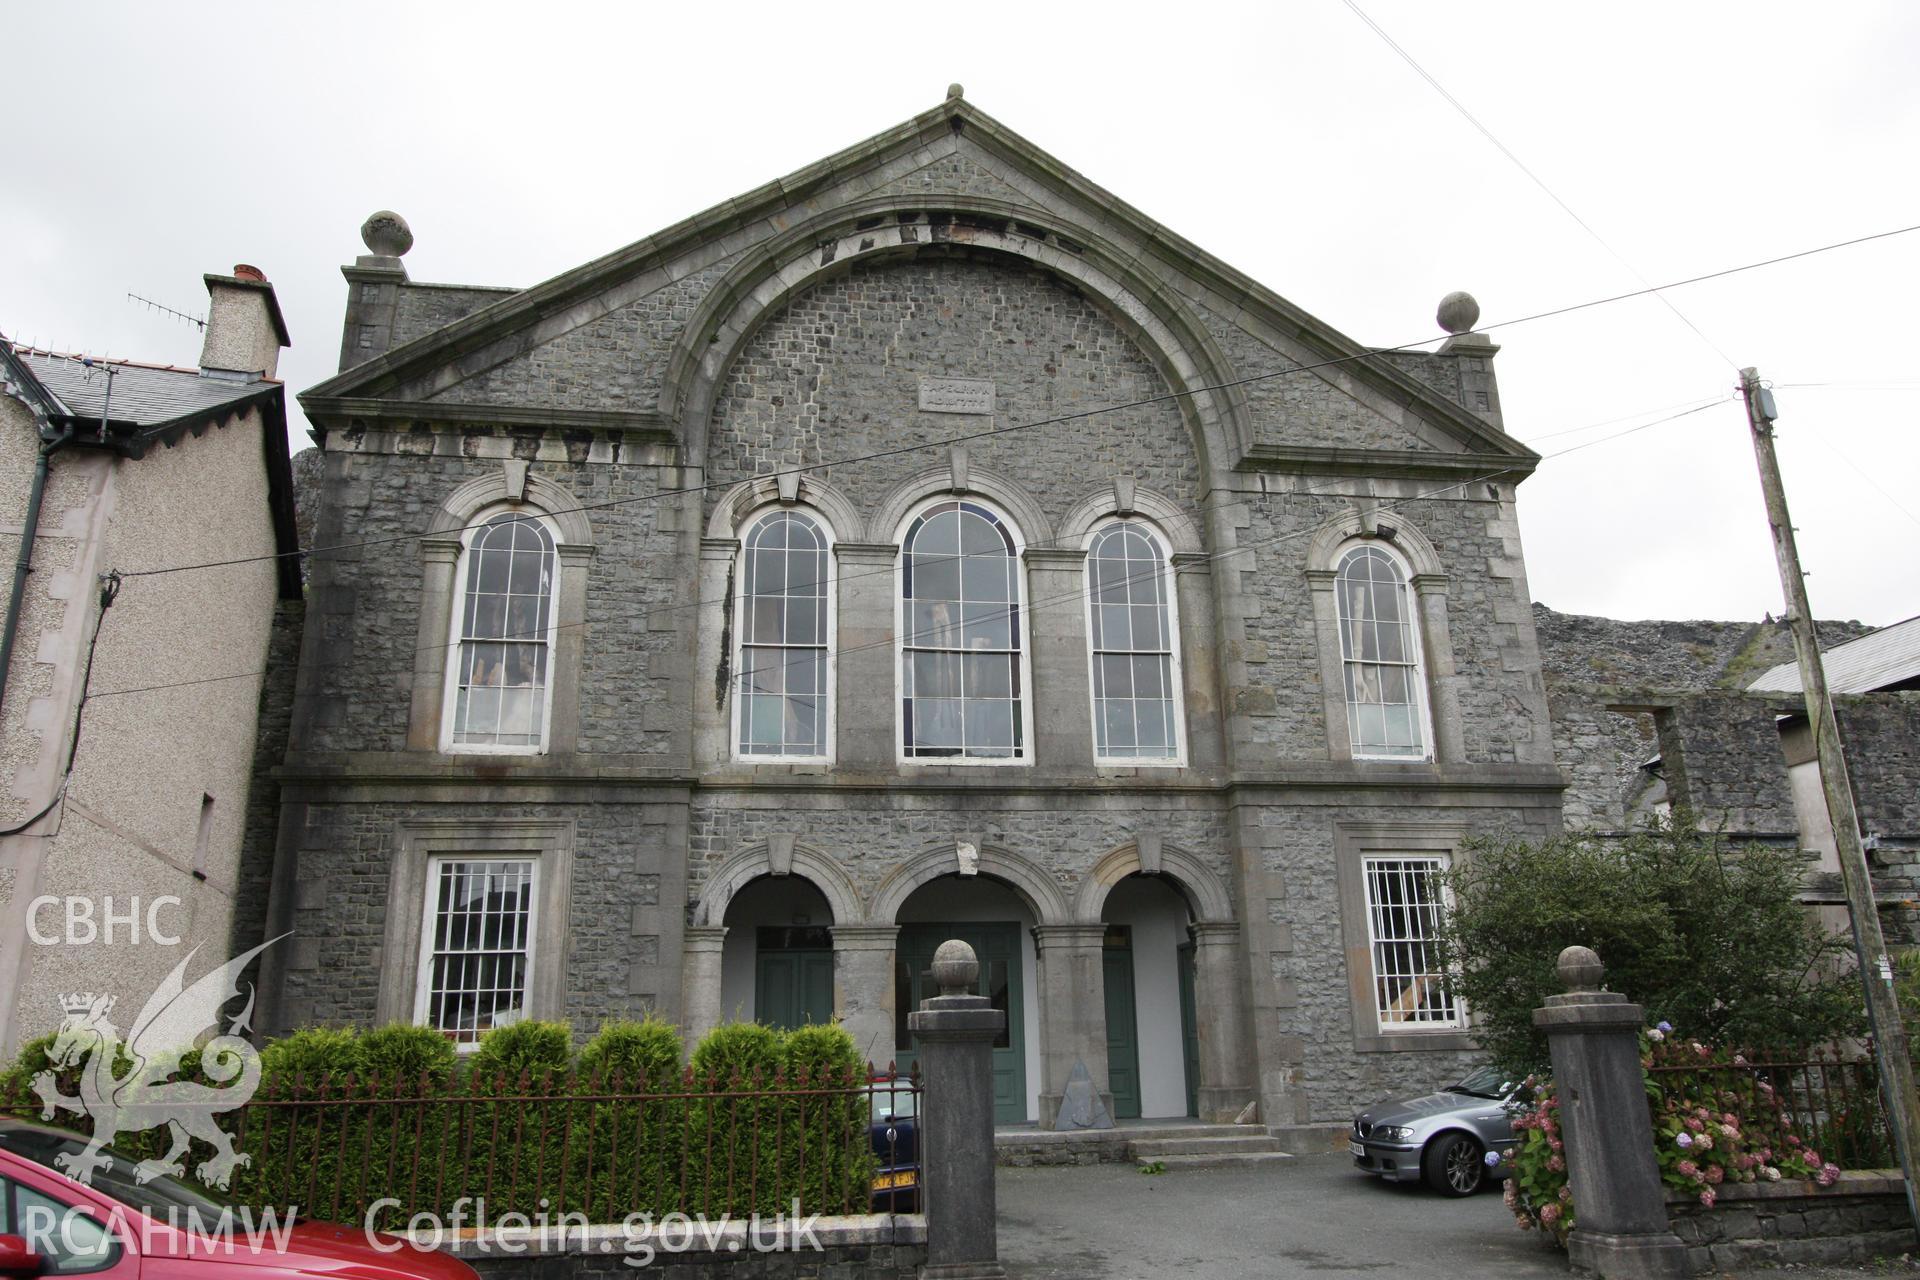 Rhiw Calvinistic Methodist chapel, the main facade viewed from the south-east